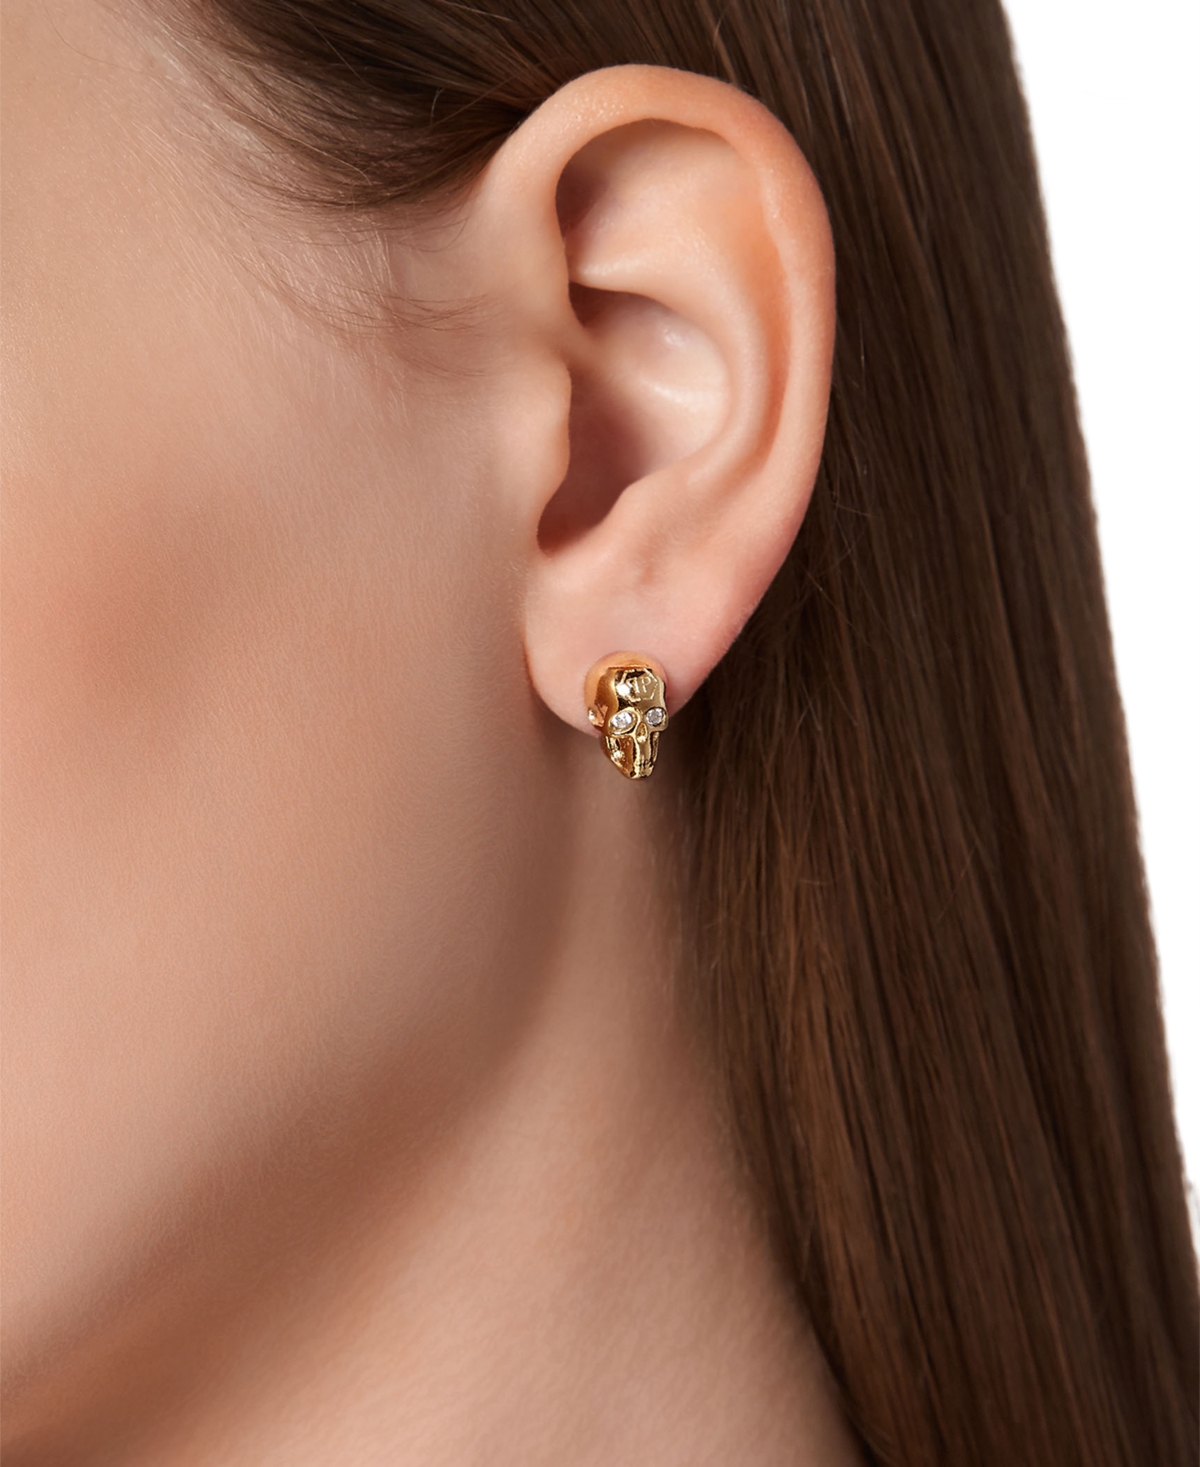 Shop Philipp Plein Gold-tone Ip Stainless Steel Pave 3d $kull Stud Earrings In Ip Yellow Gold